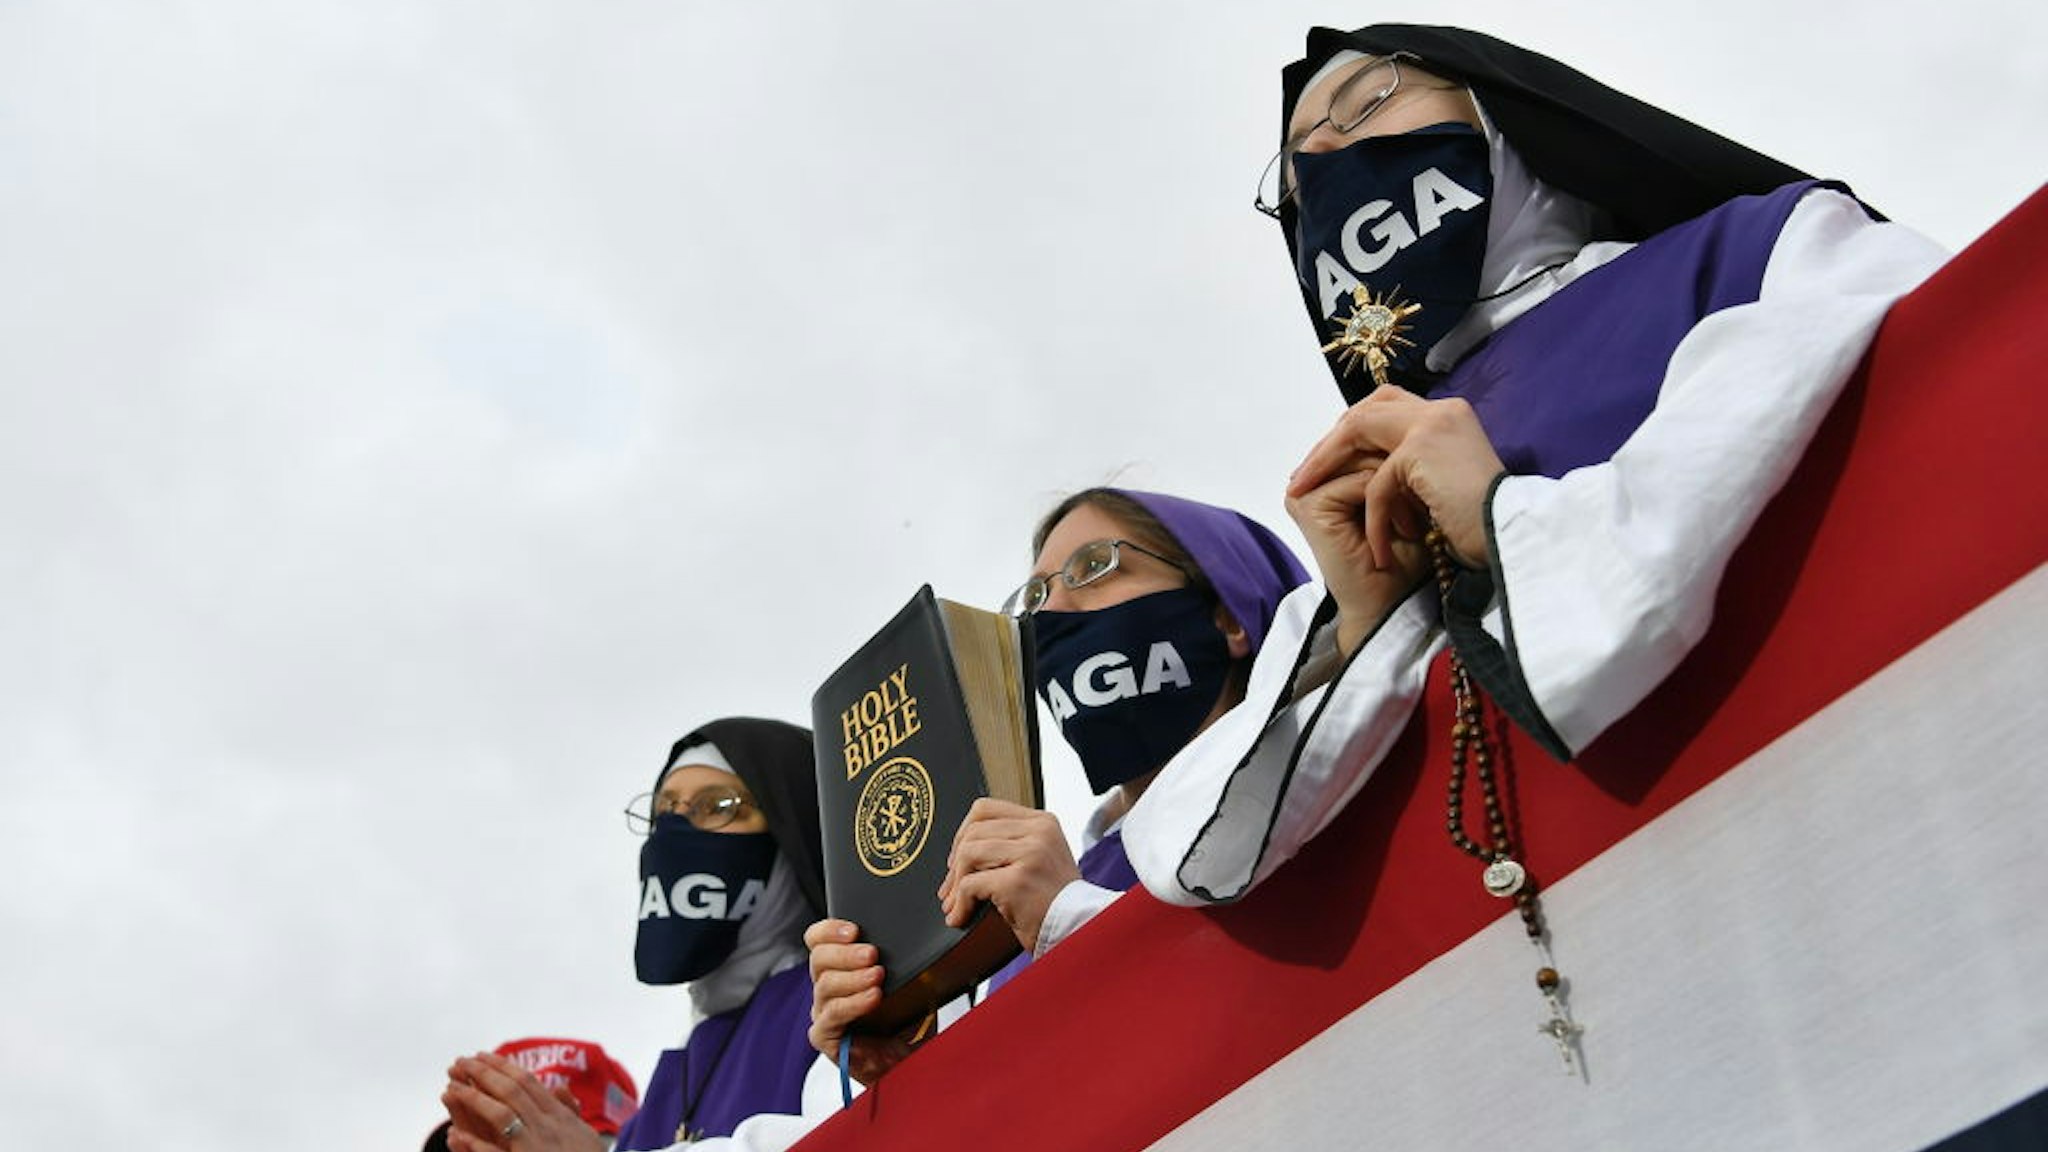 Nuns wearing masks displaying Trump's MAGA slogan listen as US President Donald Trump speaks during a campaign rally at Pickaway Agriculture and Event Center in Circleville, Ohio on October 24, 2020.